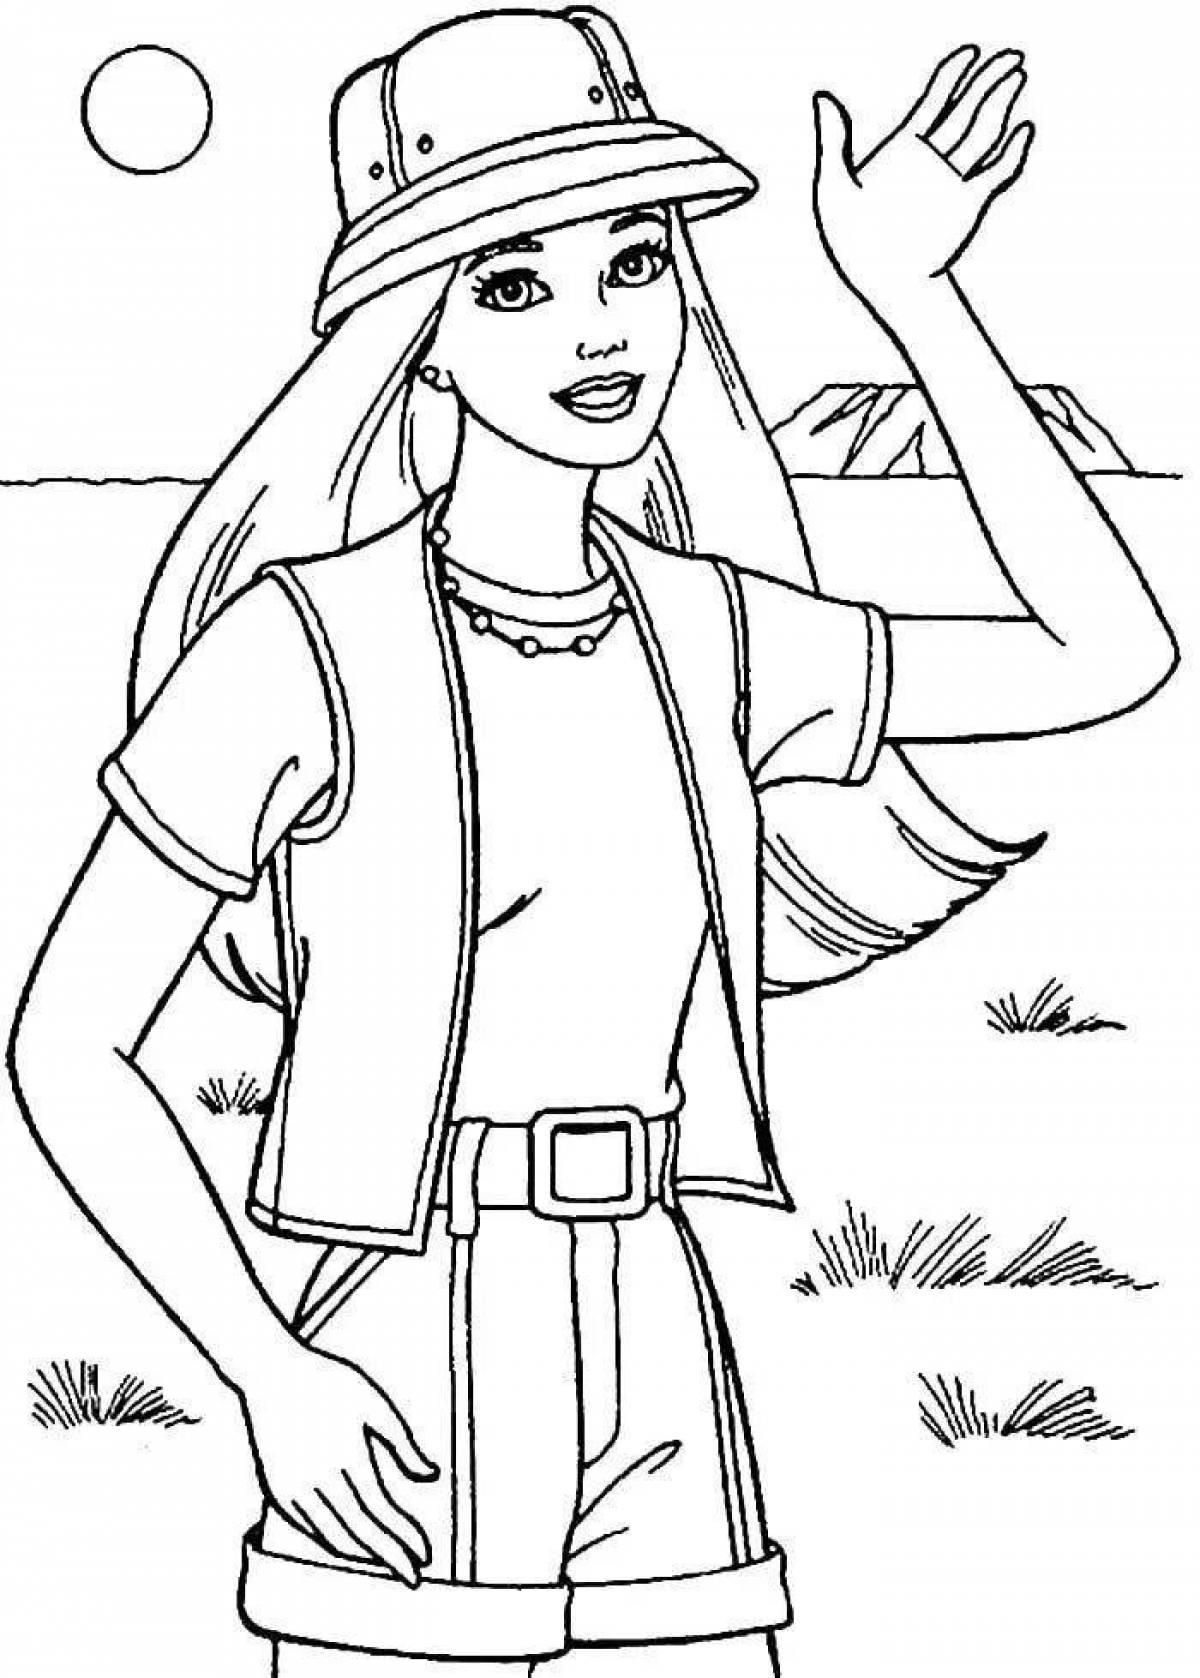 Playful barbie card coloring page